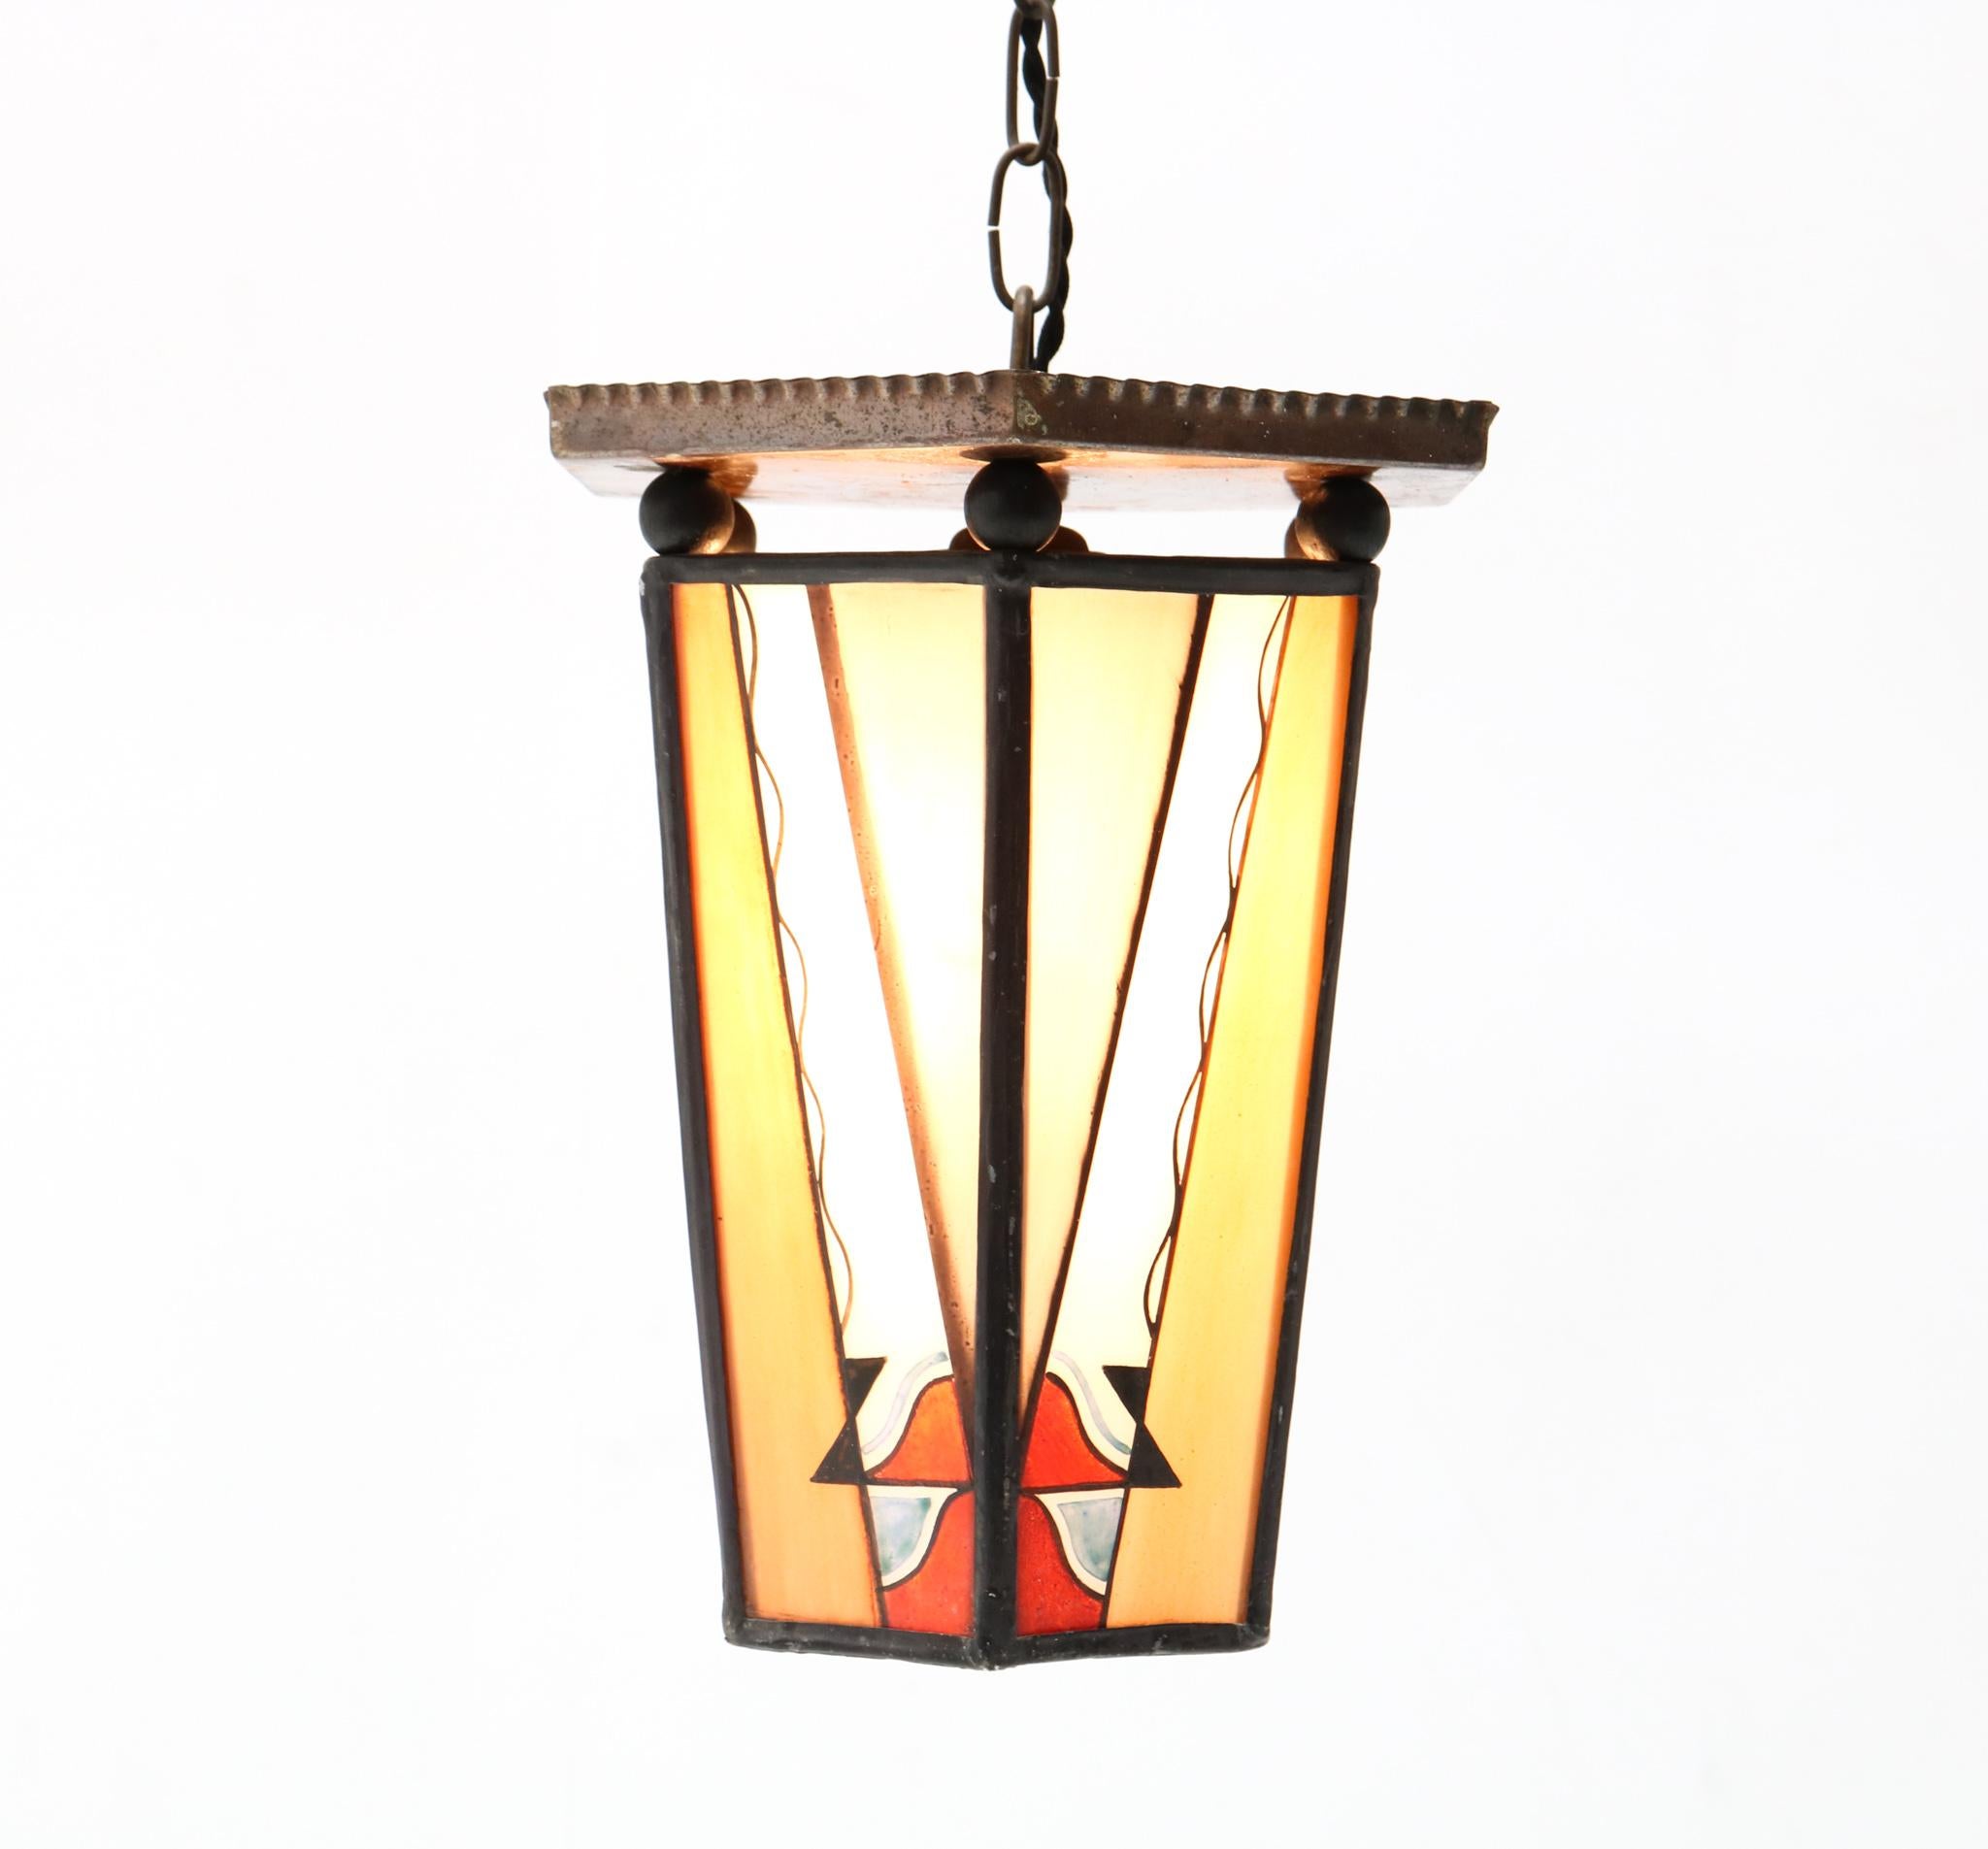 Early 20th Century Patinated Brass Art Deco Amsterdamse School Stained Glass Lantern, 1920s